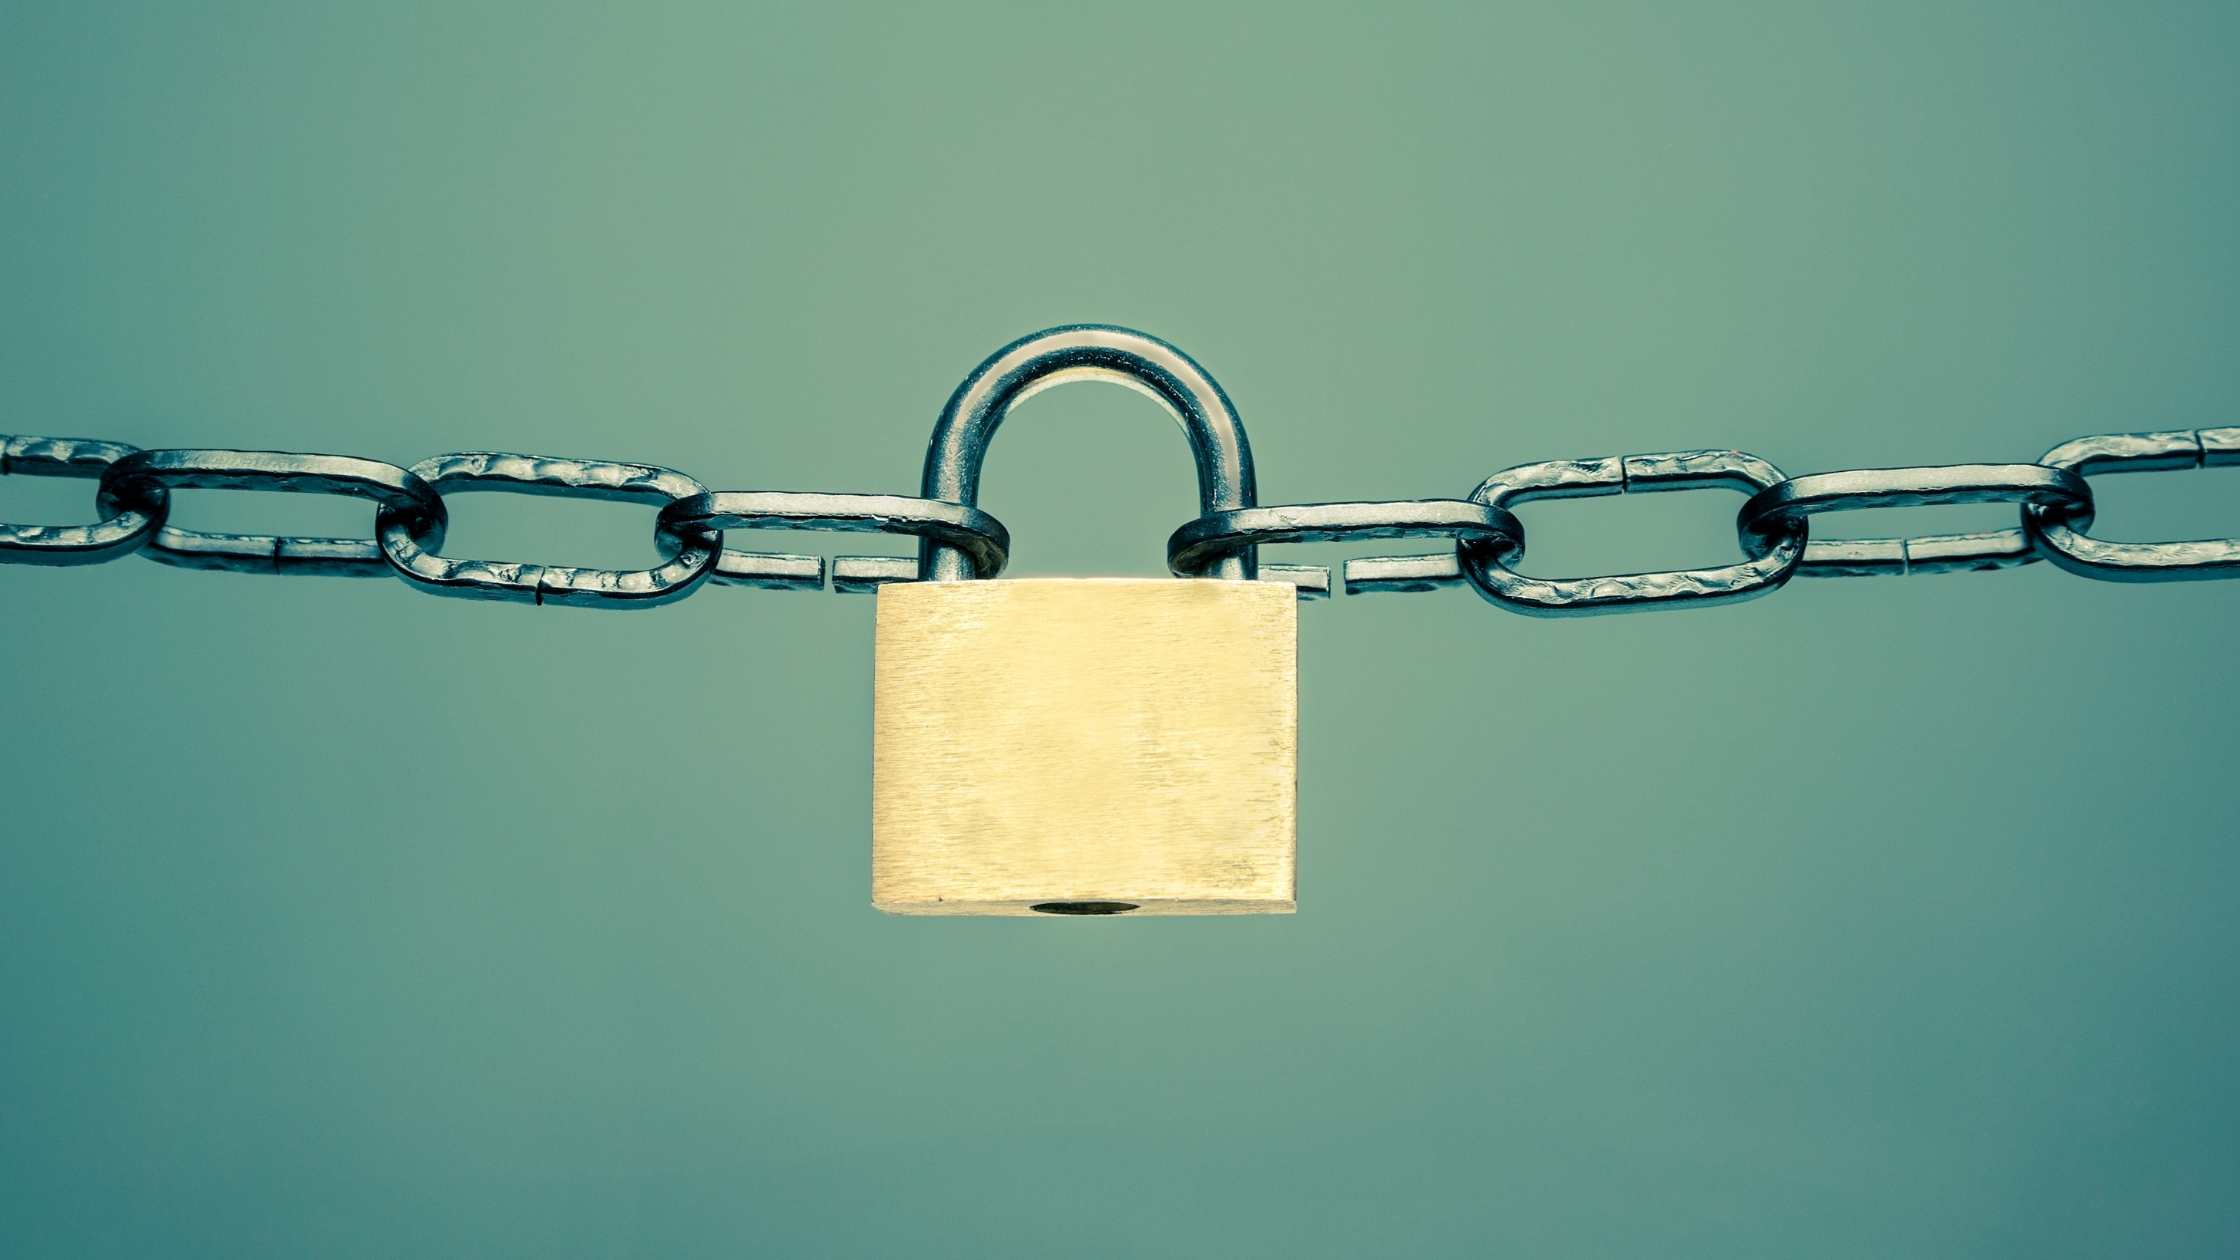 Cybersecurity concept;  chains linked by secure padlock